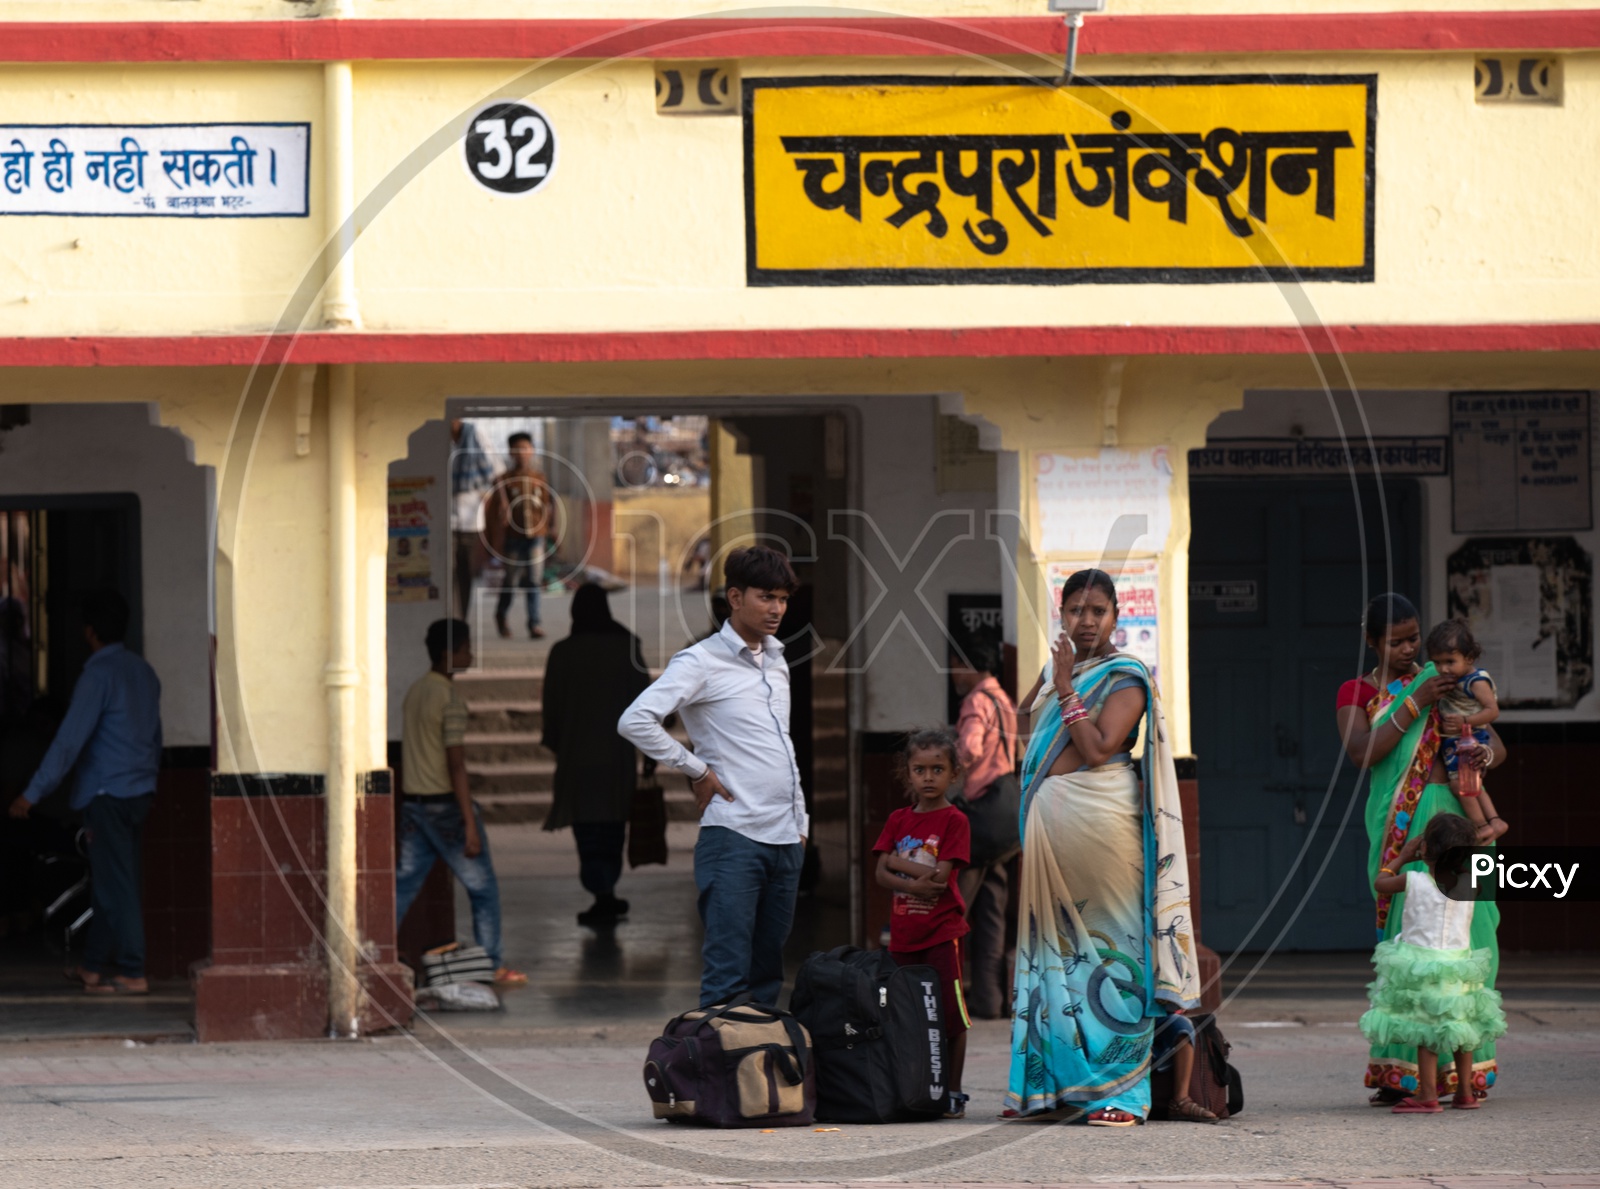 Passengers Or Family Waiting In a Railway Station Platform